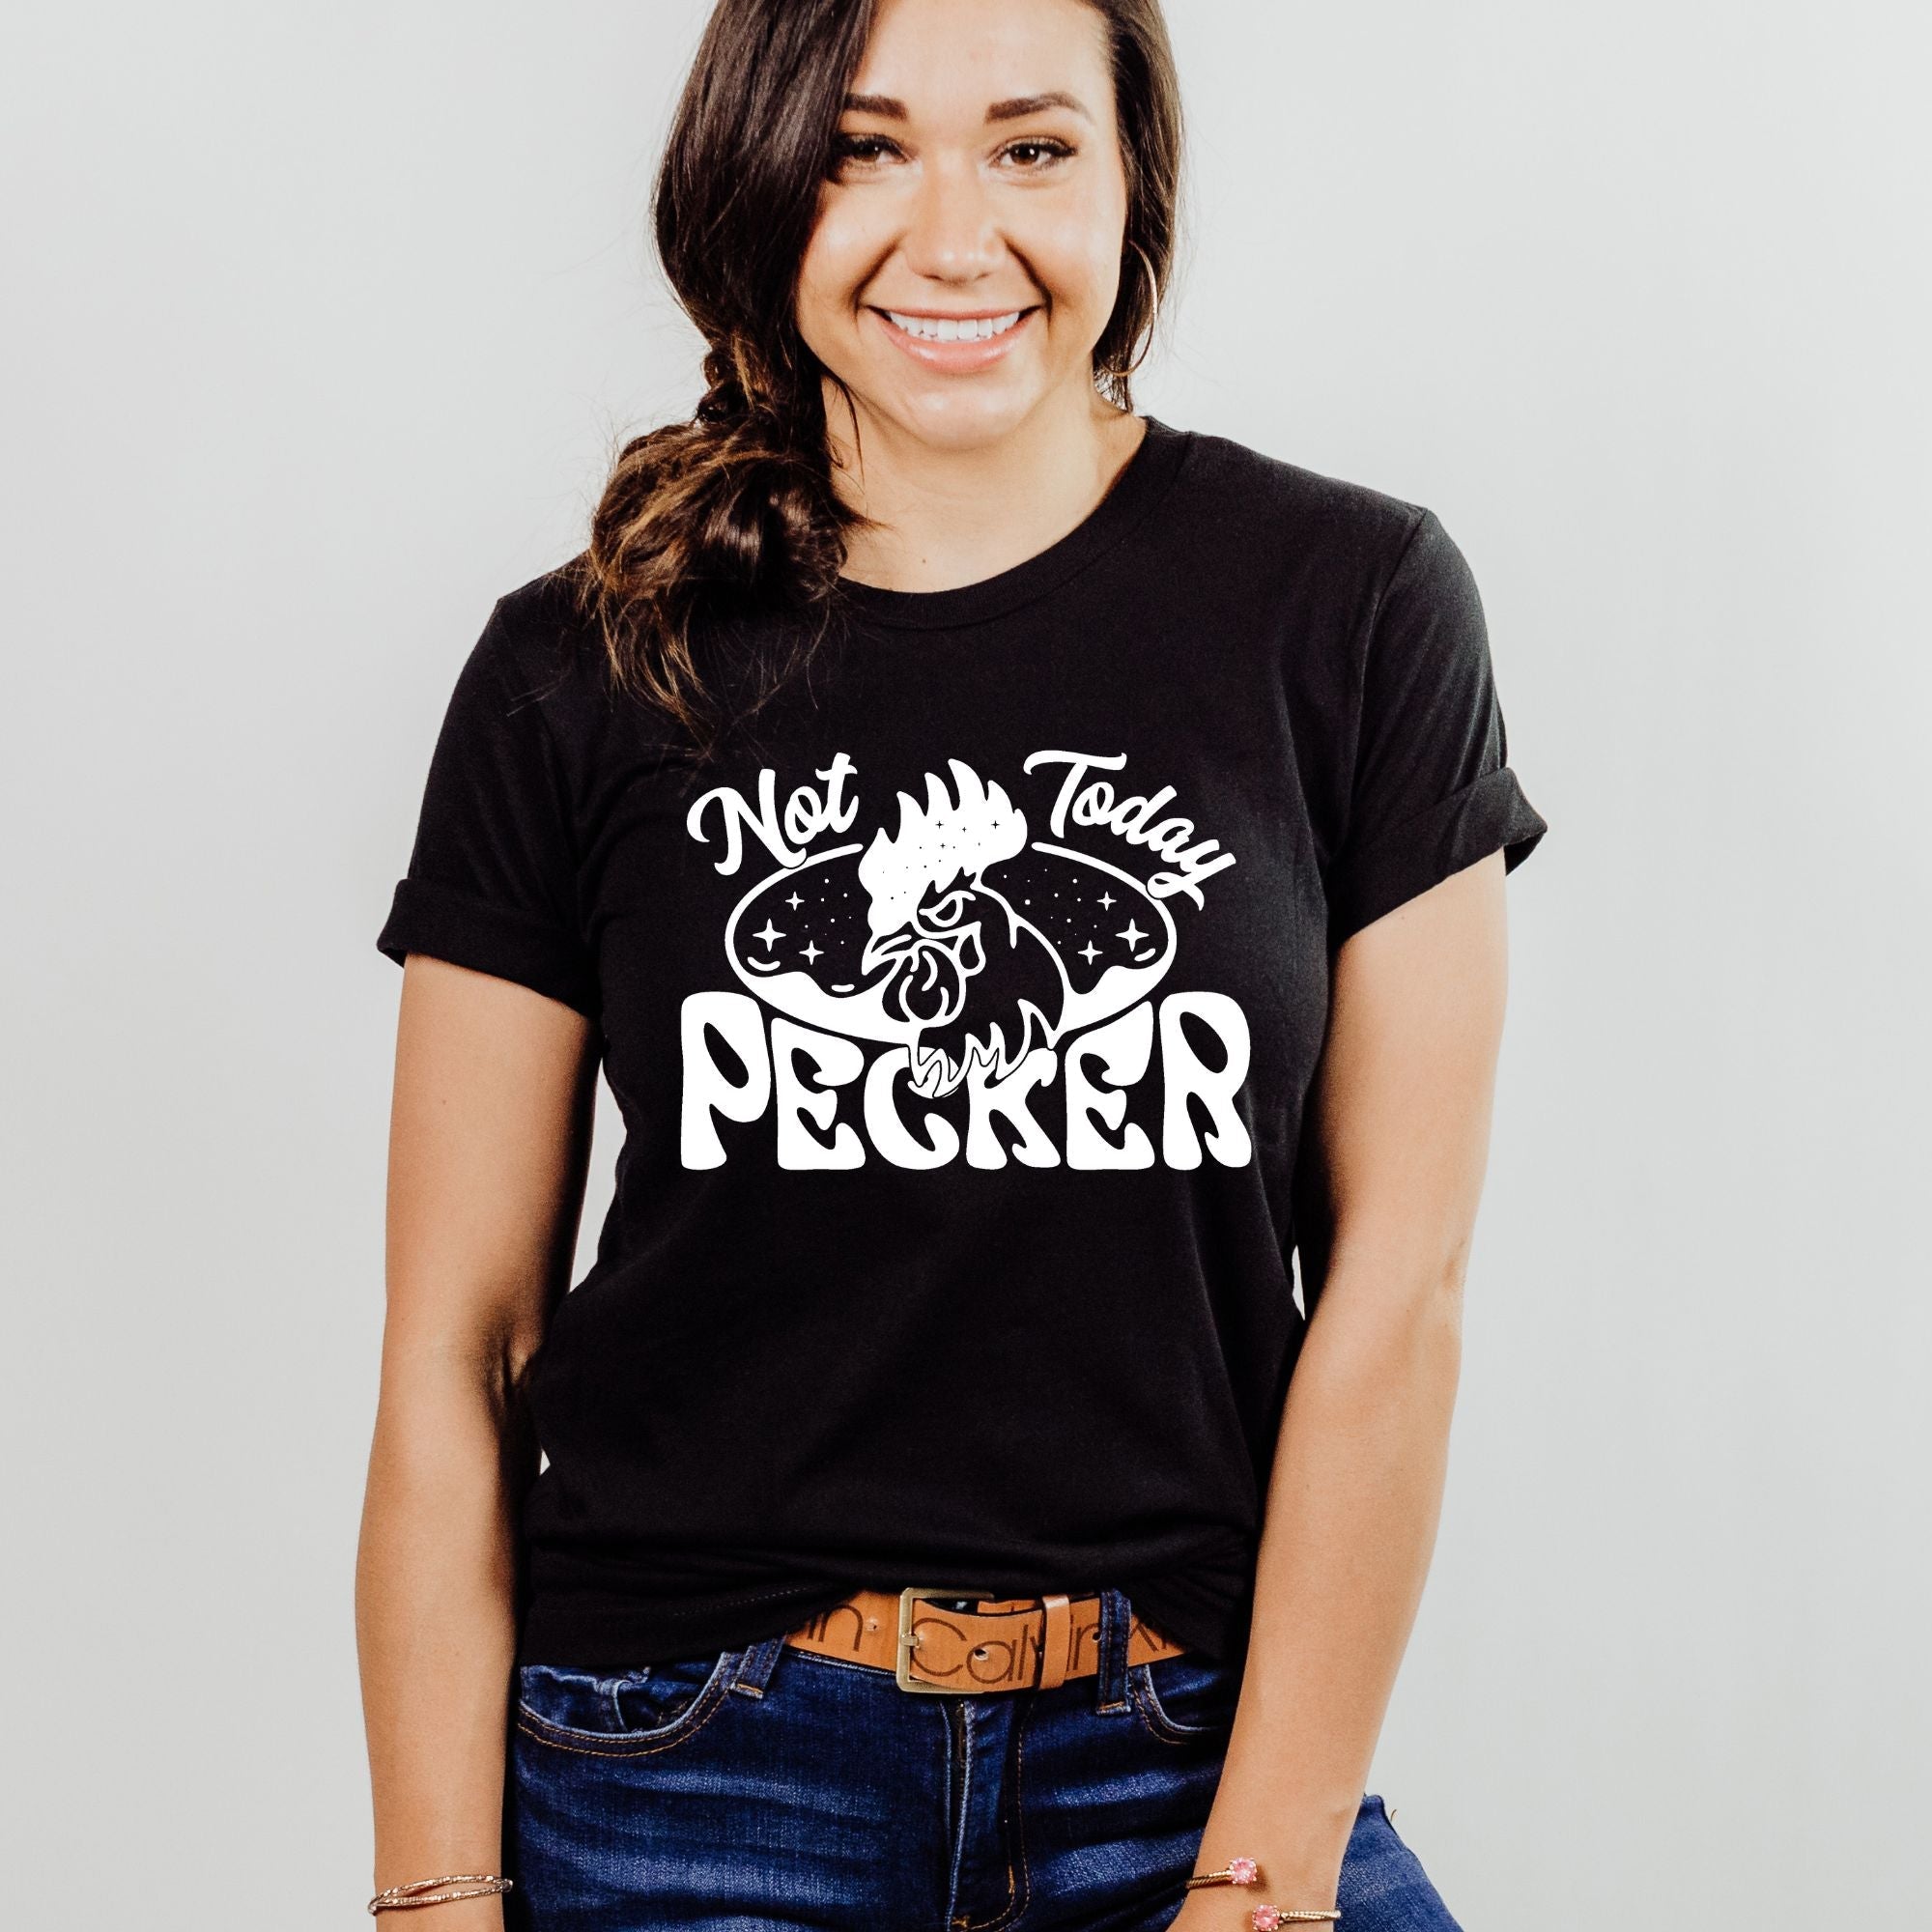 Not Today Pecker TShirt Nature Graphic Tee *UNISEX FIT*-208 Tees Wholesale, Idaho